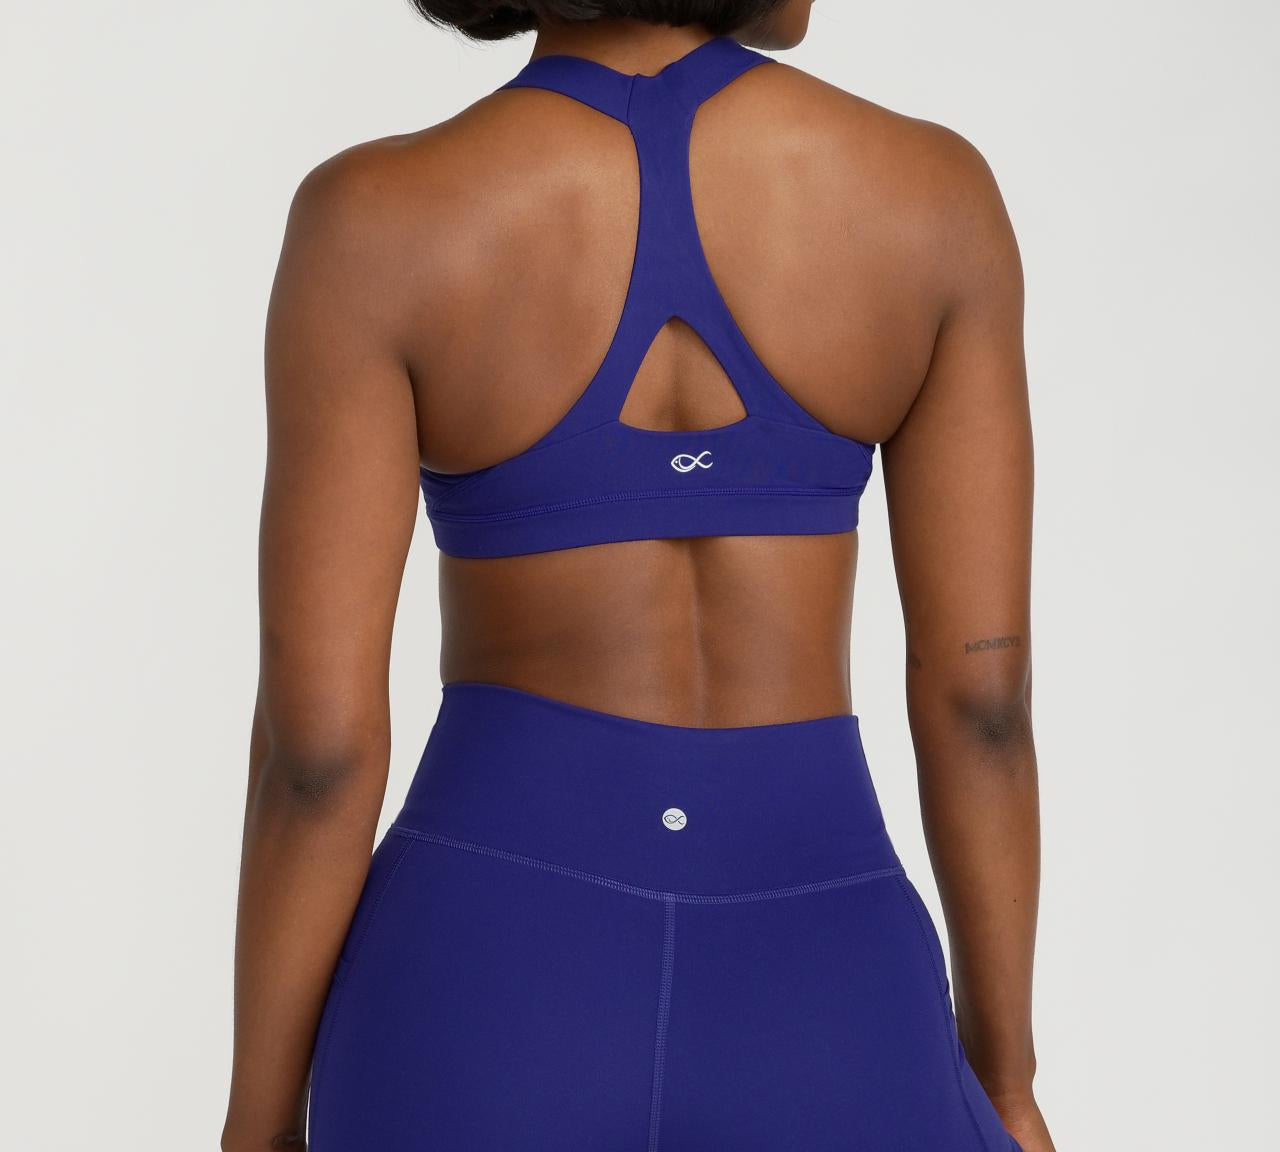 Women's Collection – Southern Athletica